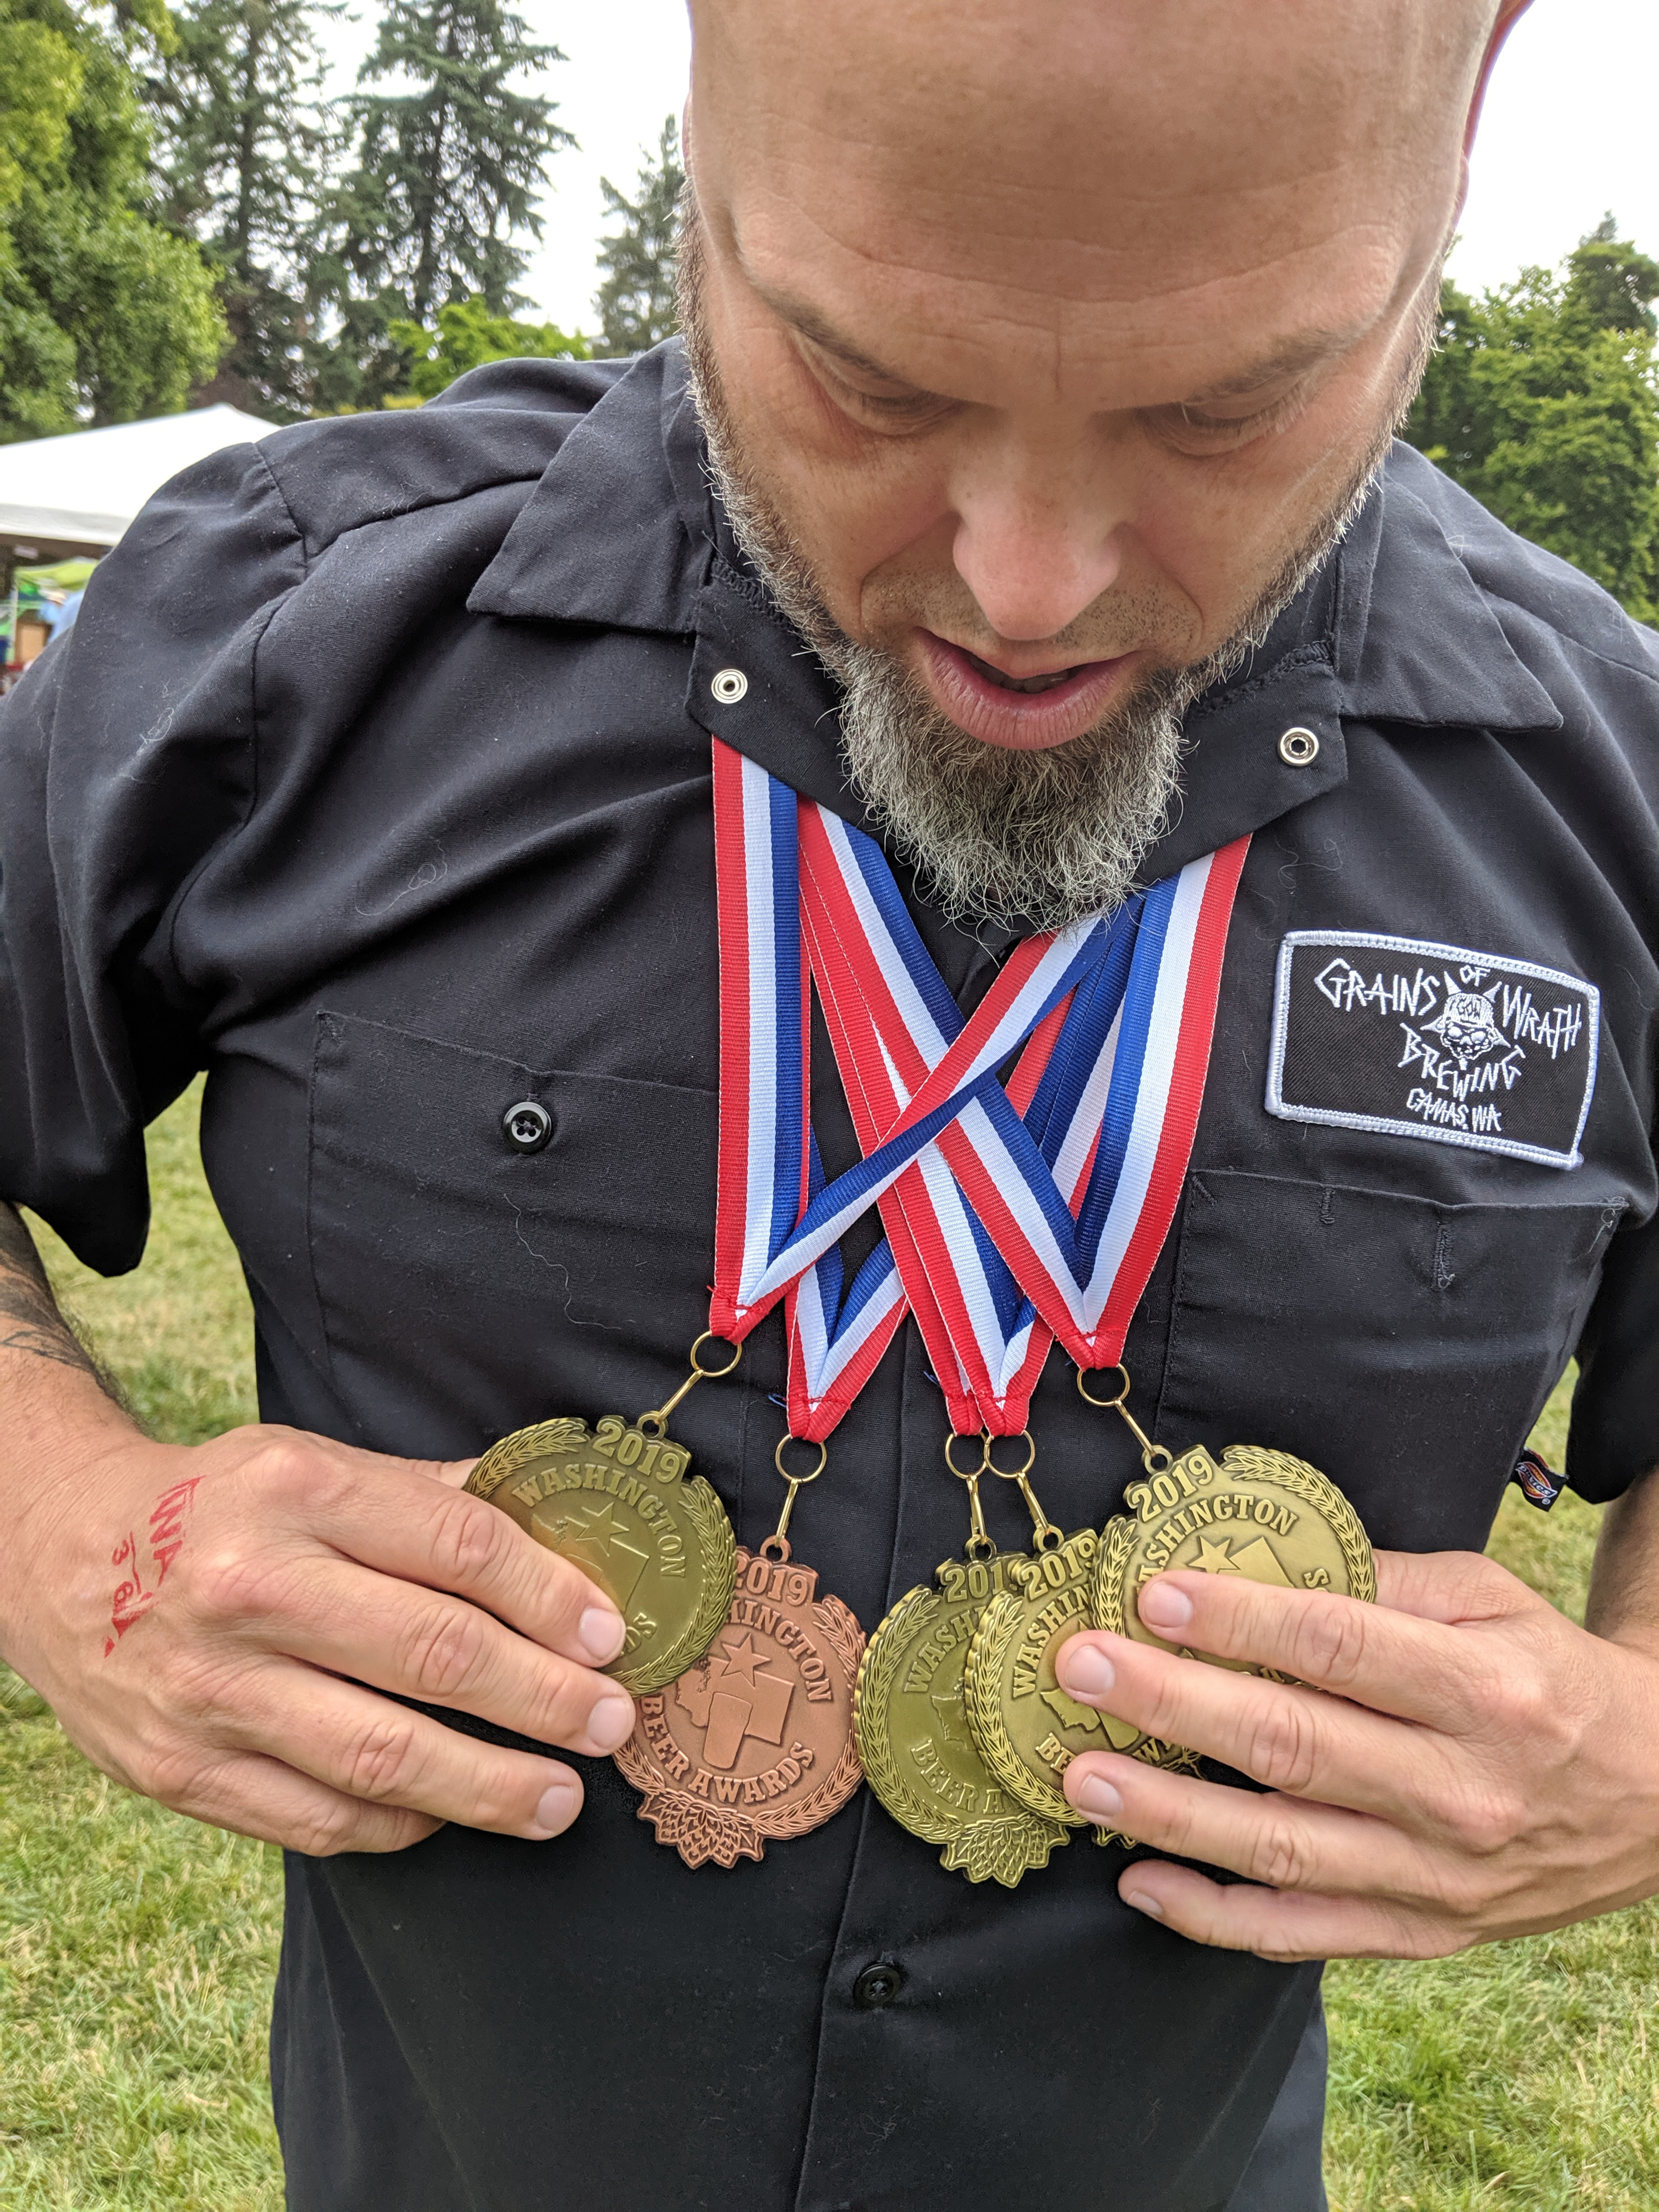 Grains of Wrath Brewing co-founder Mike Hunsaker displays the five medals his brewery won at the Washington Beer Awards earlier this month. (Submitted by Grains of Wrath Brewing)